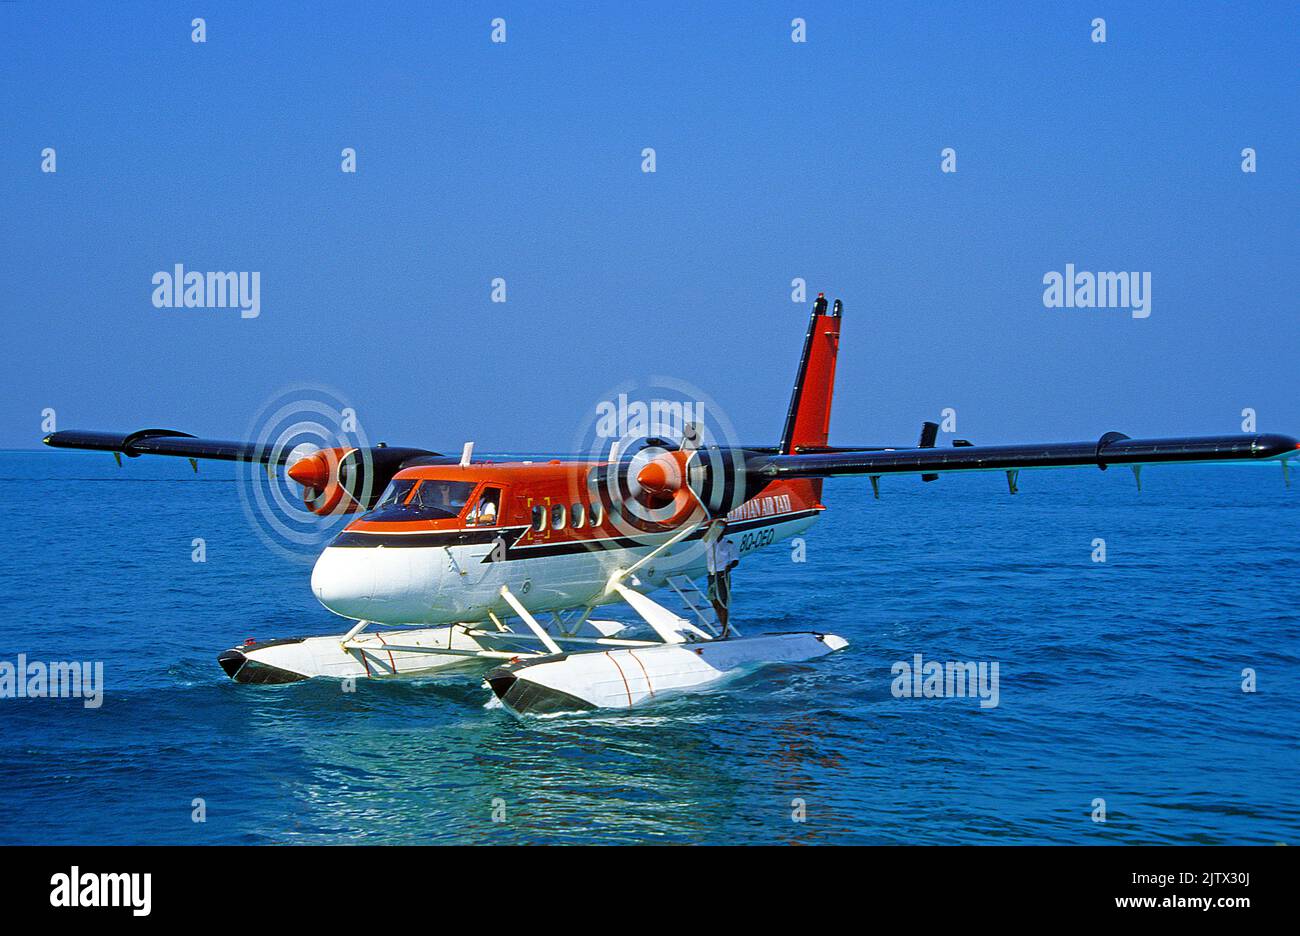 Starting waterplane, air taxis are common transfers from airport to resort islands, lagoon of Kuredu island, Laviyani Atoll, Indian Ocean, Maldives Stock Photo